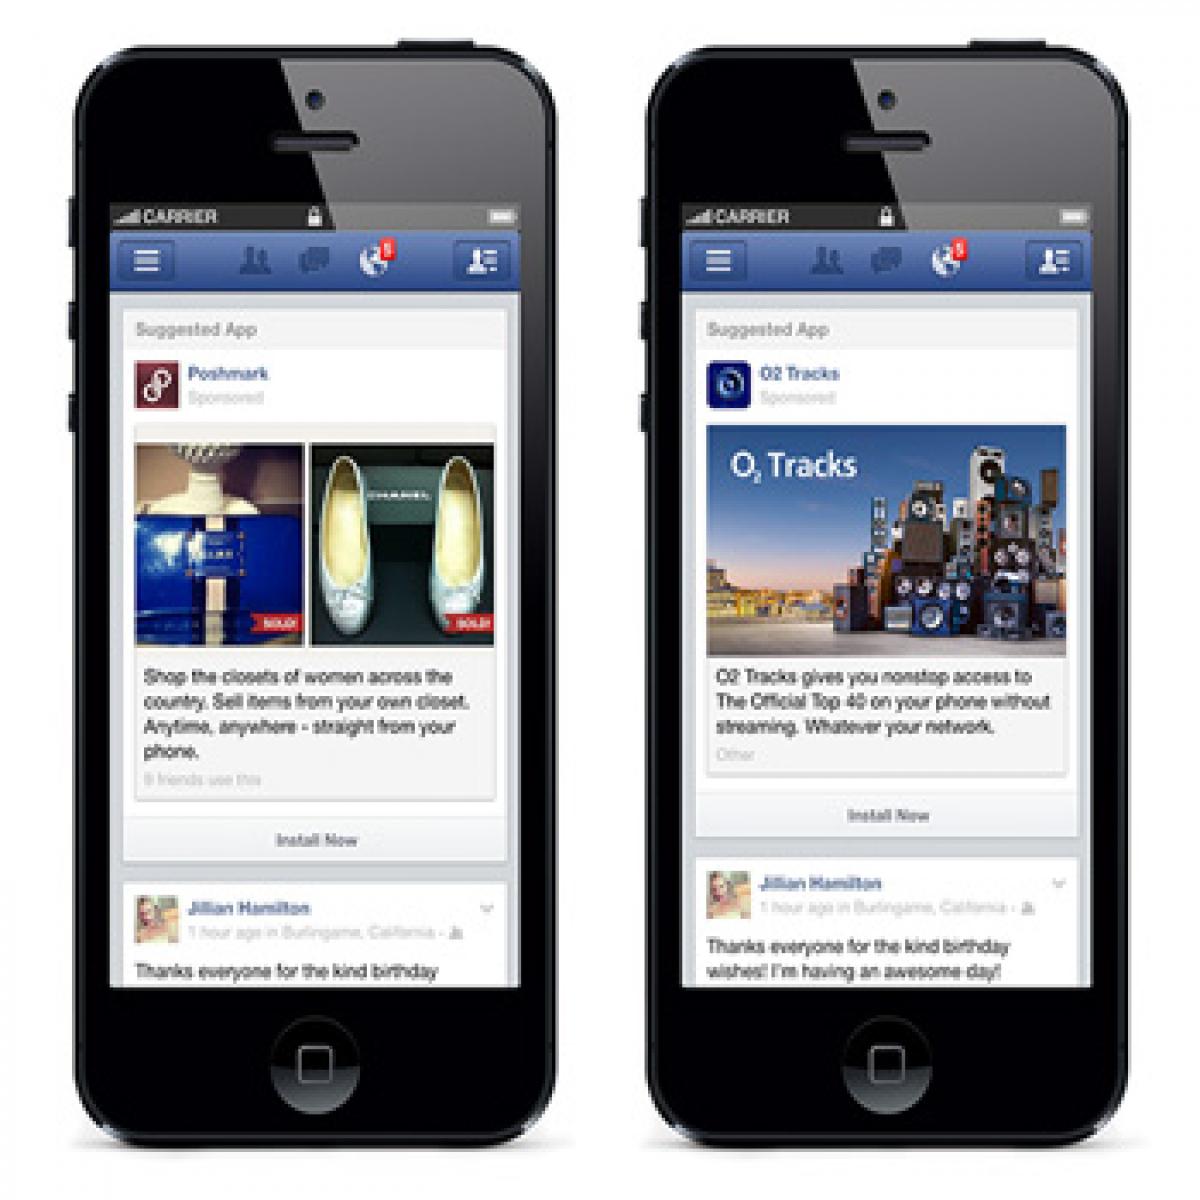 Facebook top choice for app advertising: Study